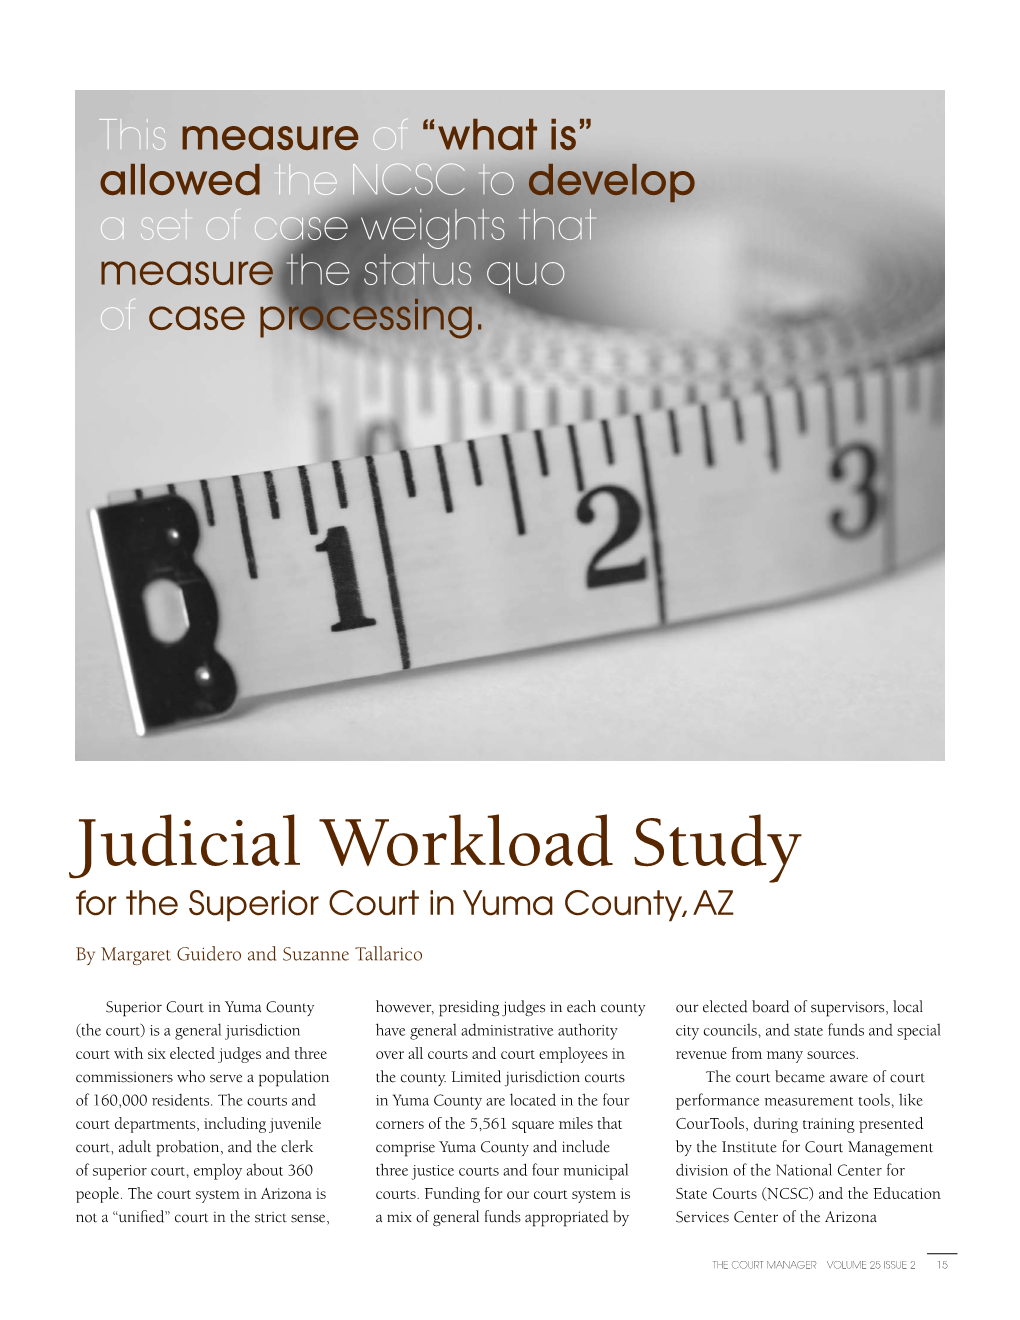 Judicial Workload Study for the Superior Court in Yuma County, AZ